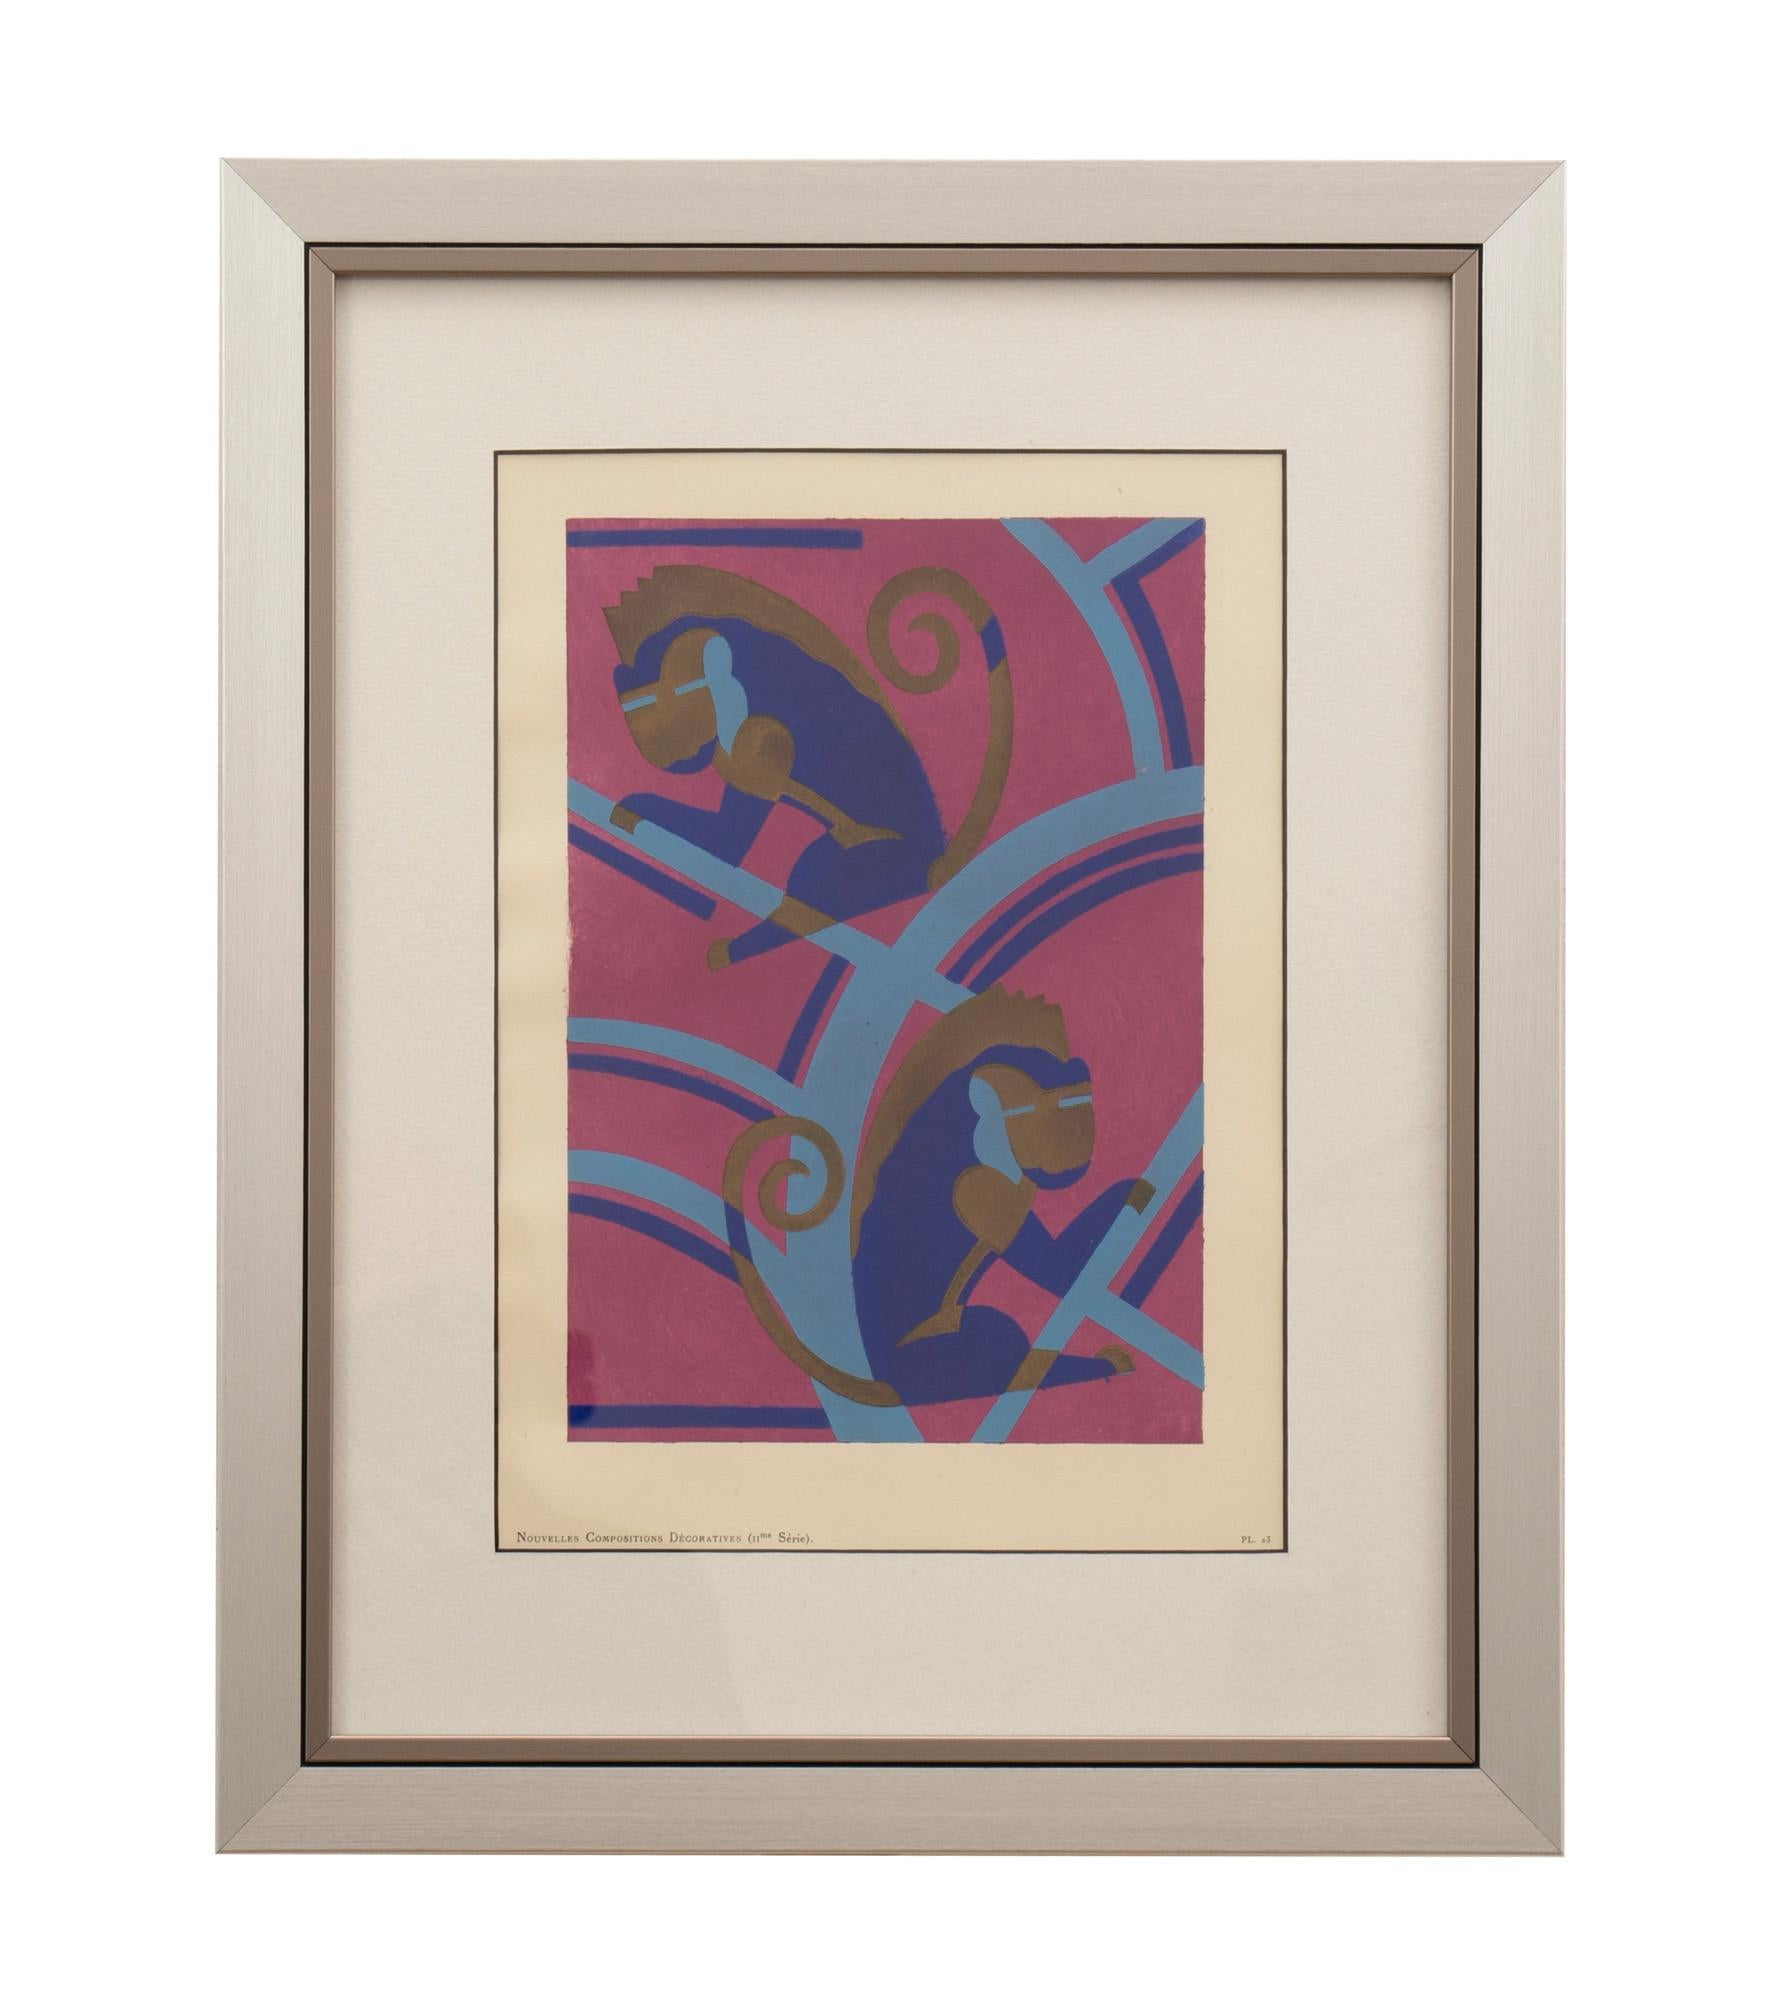 Art Deco Pochoir by Serge Gladky
Series 2, newly framed
Measures: H 44cm, W 36cm, D 2cm
French, circa 1925.

Serge Gladky, a superb artist who produced these Pochoirs for textile and wall paper designs, this one shows a geometric design of